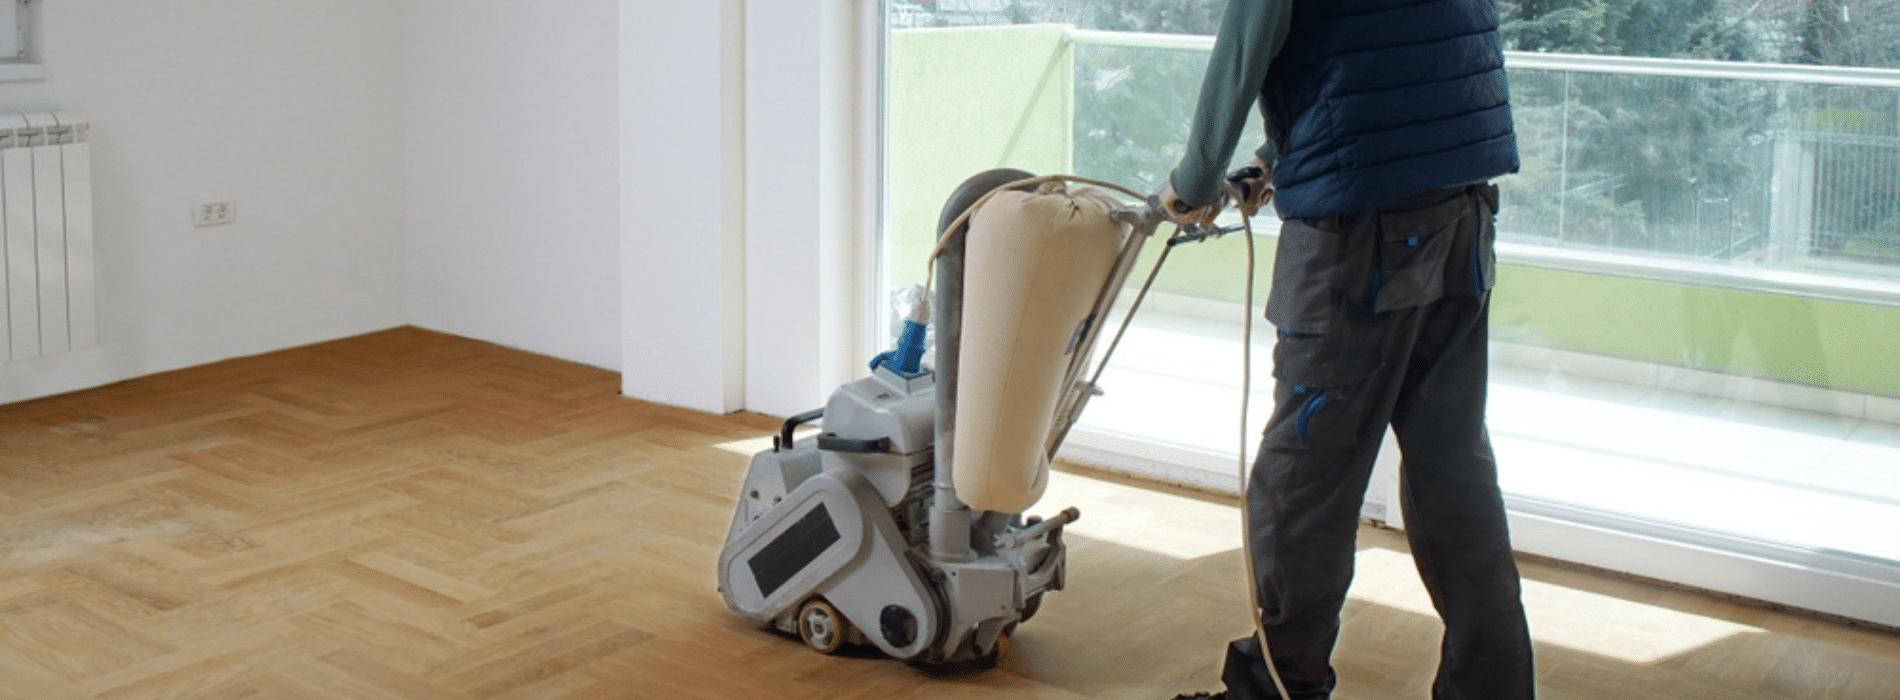 In Norwood Green, UB2, Mr Sander® are using a Bona Scorpion drum sander with a dimension of 200 mm, 1.5 kW power, 240 V voltage, and 50 Hz frequency. They are also utilizing a dust extraction system with a HEPA filter for optimal cleanliness and efficiency while sanding a parquet floor.